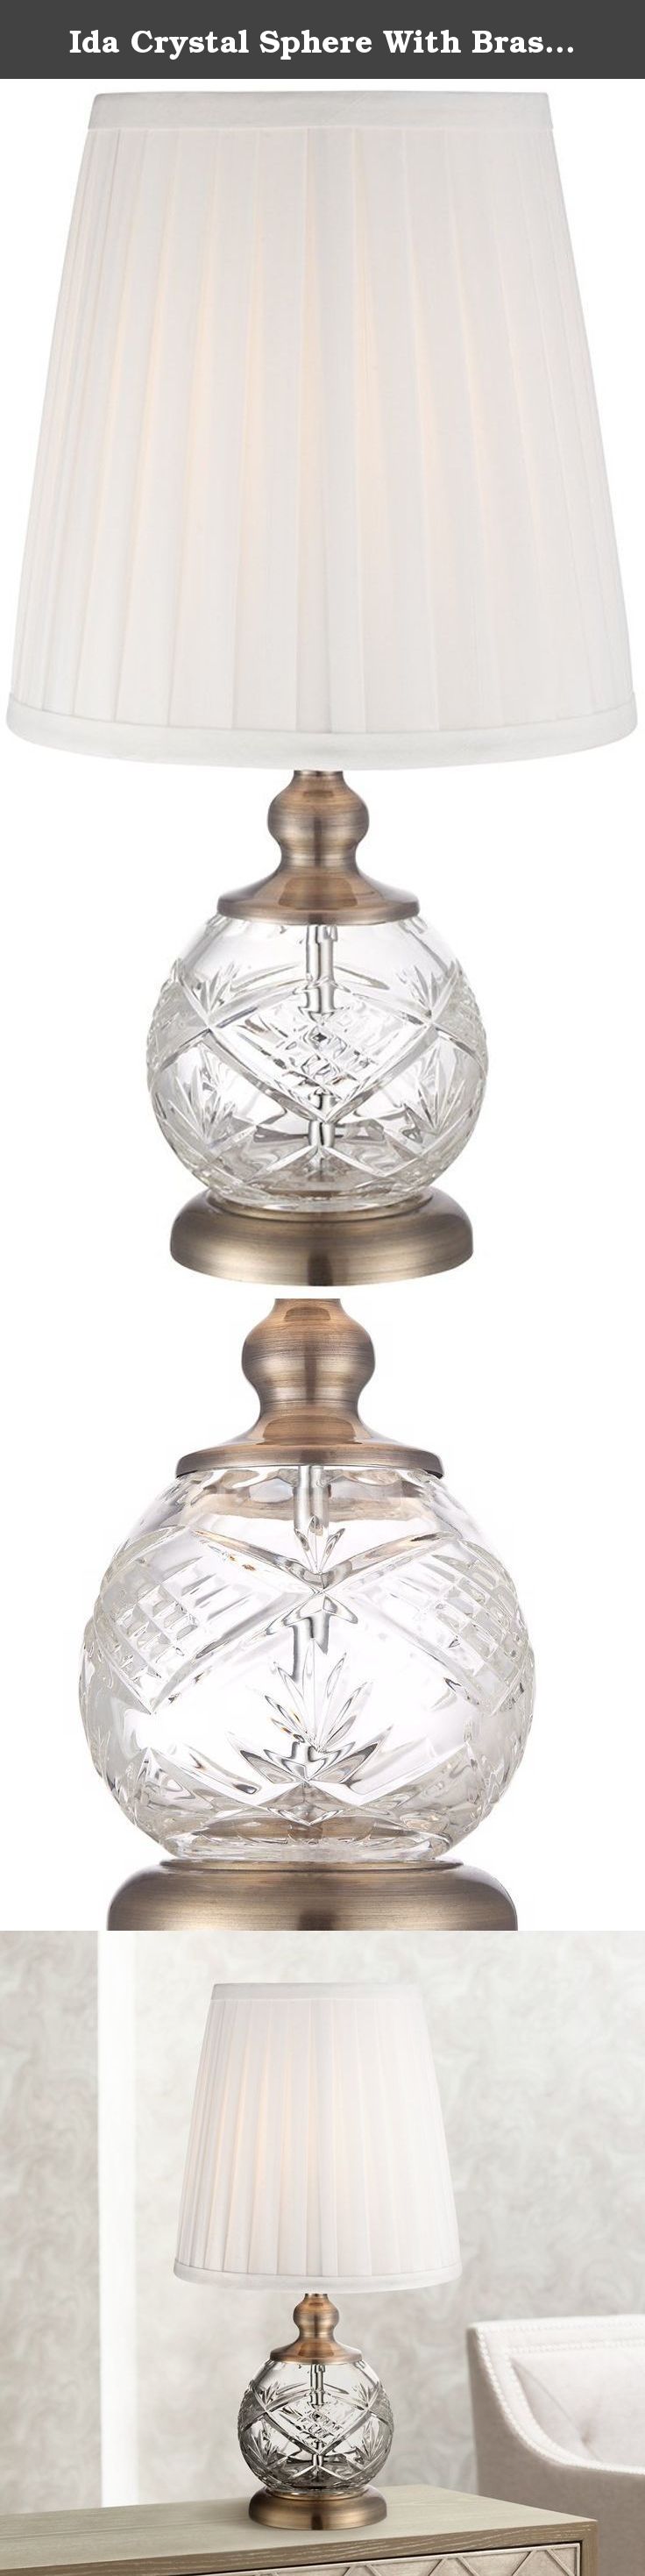 ida crystal sphe table lamps shades lighting ceiling miniature accent decouvrez des idees sur theme verre grave sphere with brass mini lamp inch bedside dining clearance storage